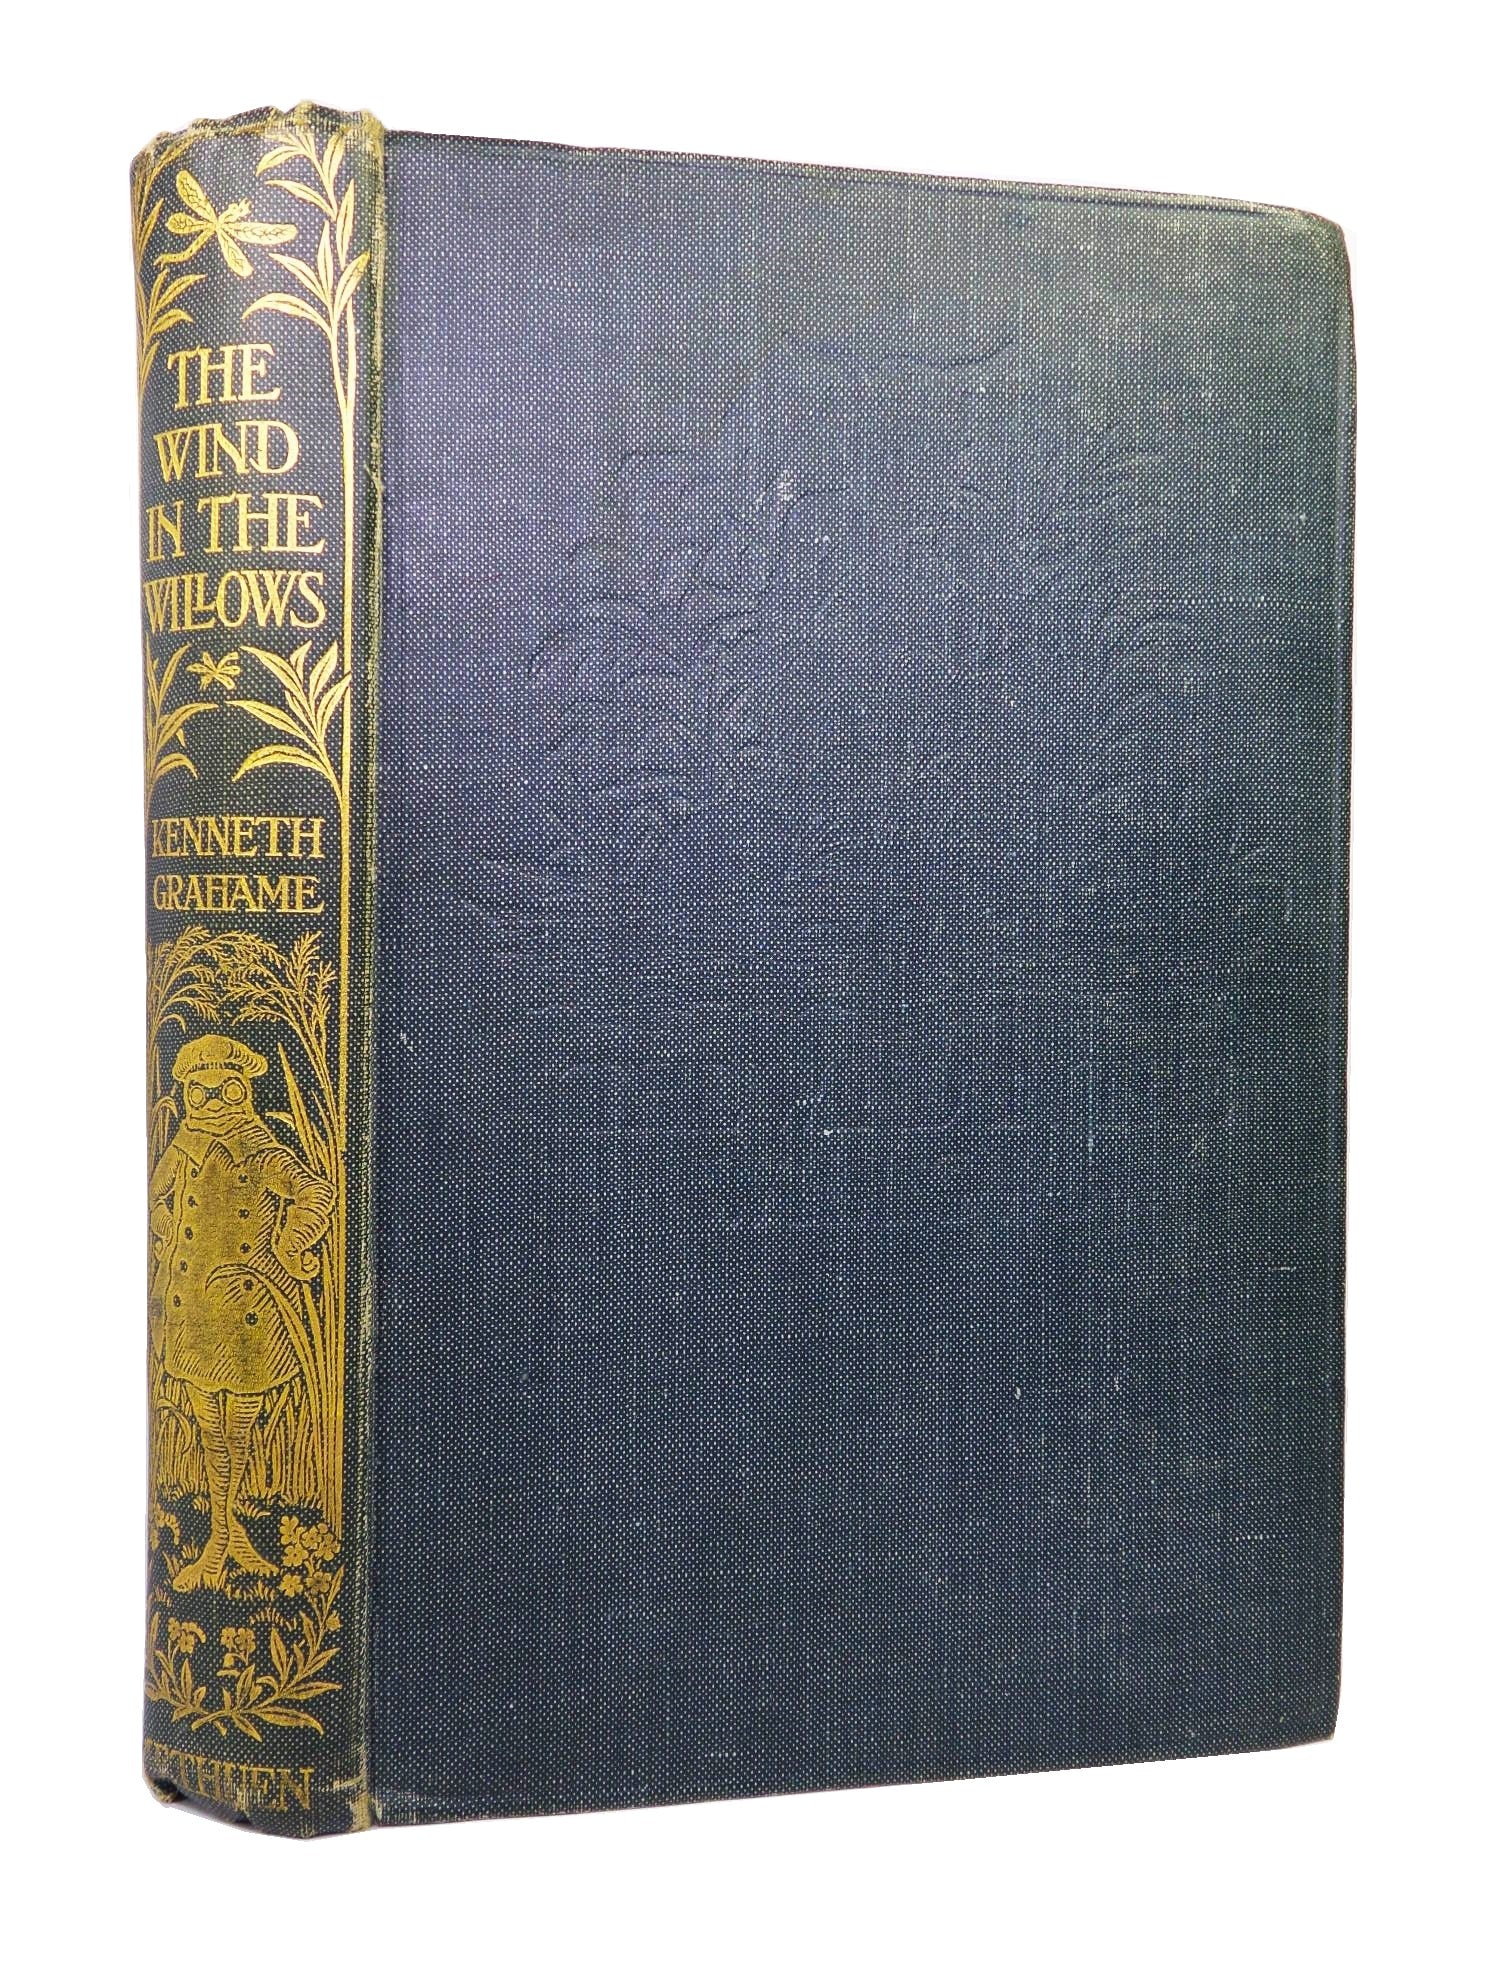 THE WIND IN THE WILLOWS BY KENNETH GRAHAME 1926 NINETEENTH EDITION